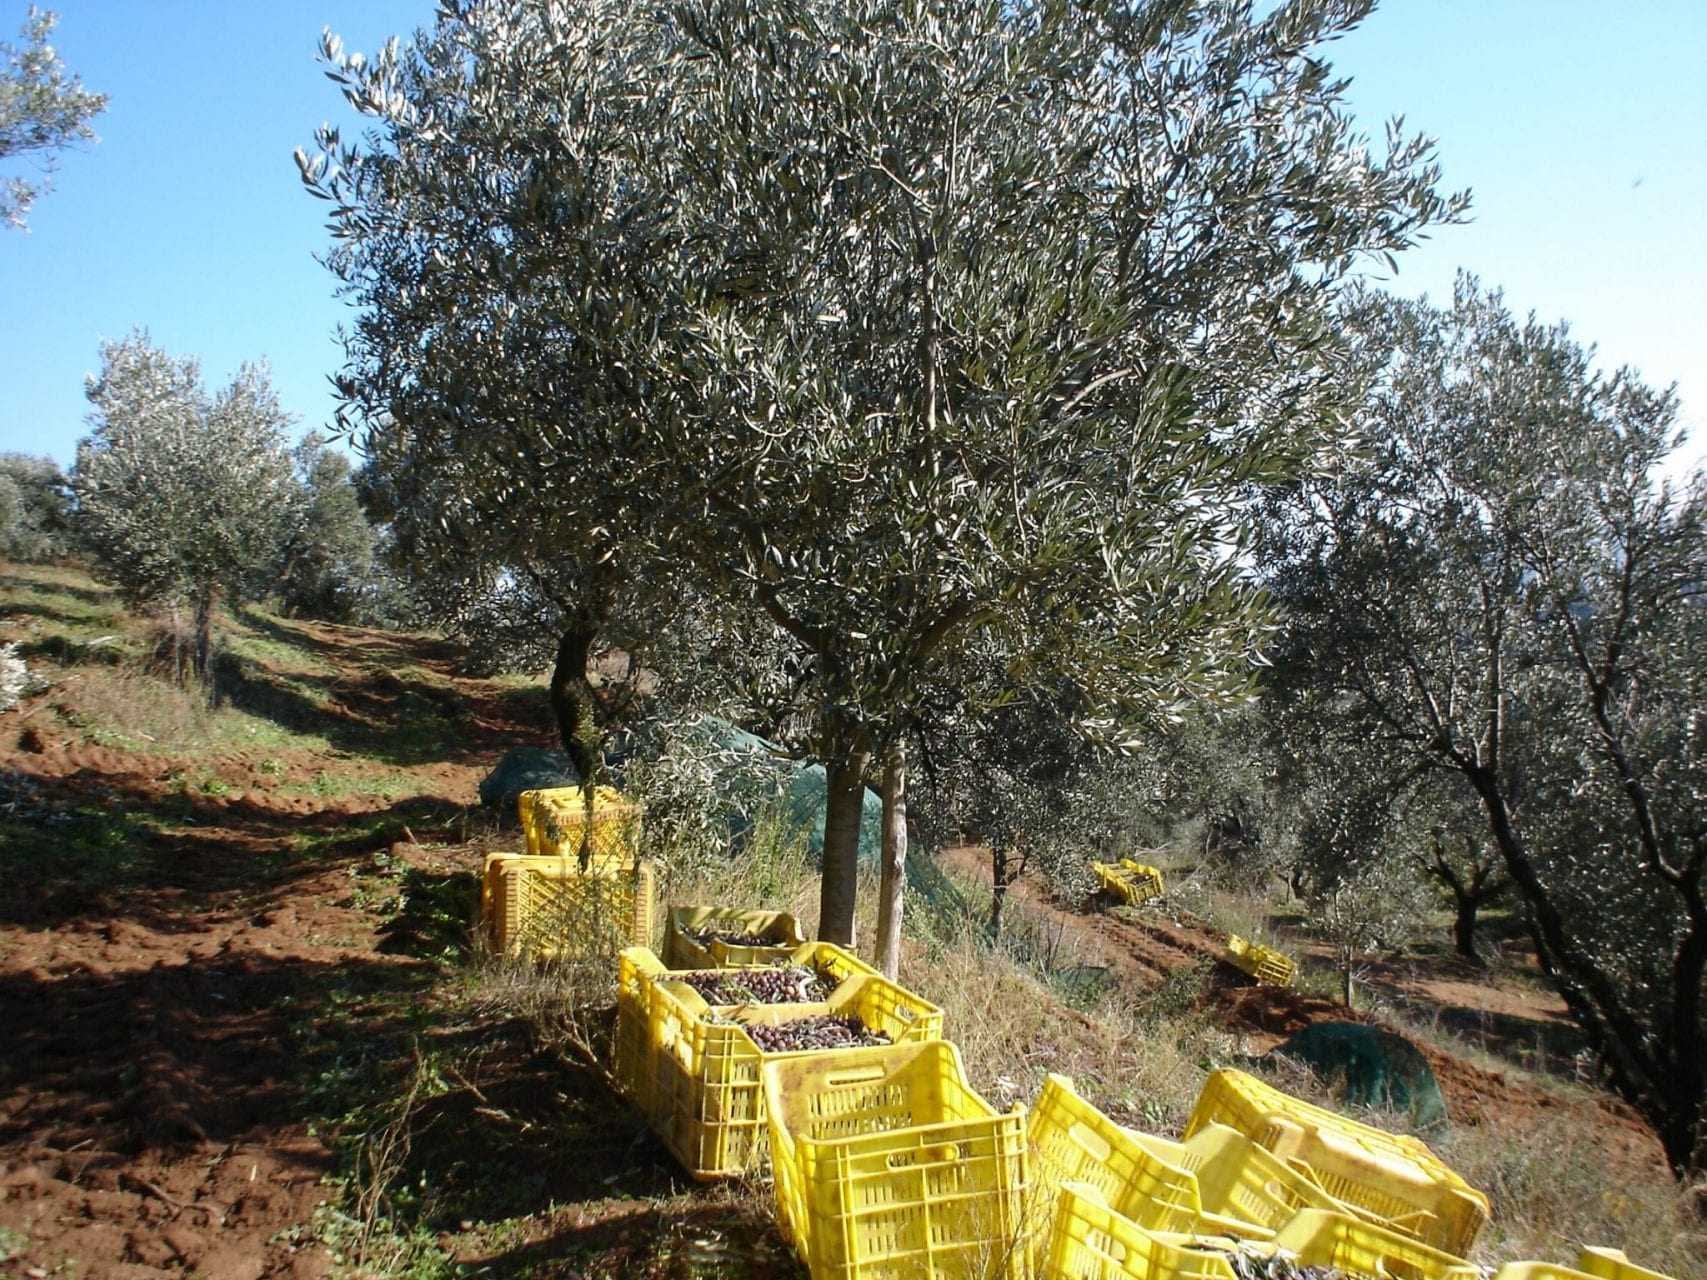 world-the-best-olive-oils-competitions-europe-strong-showing-by-calabrian-producers-at-world-competition-olive-oil-times